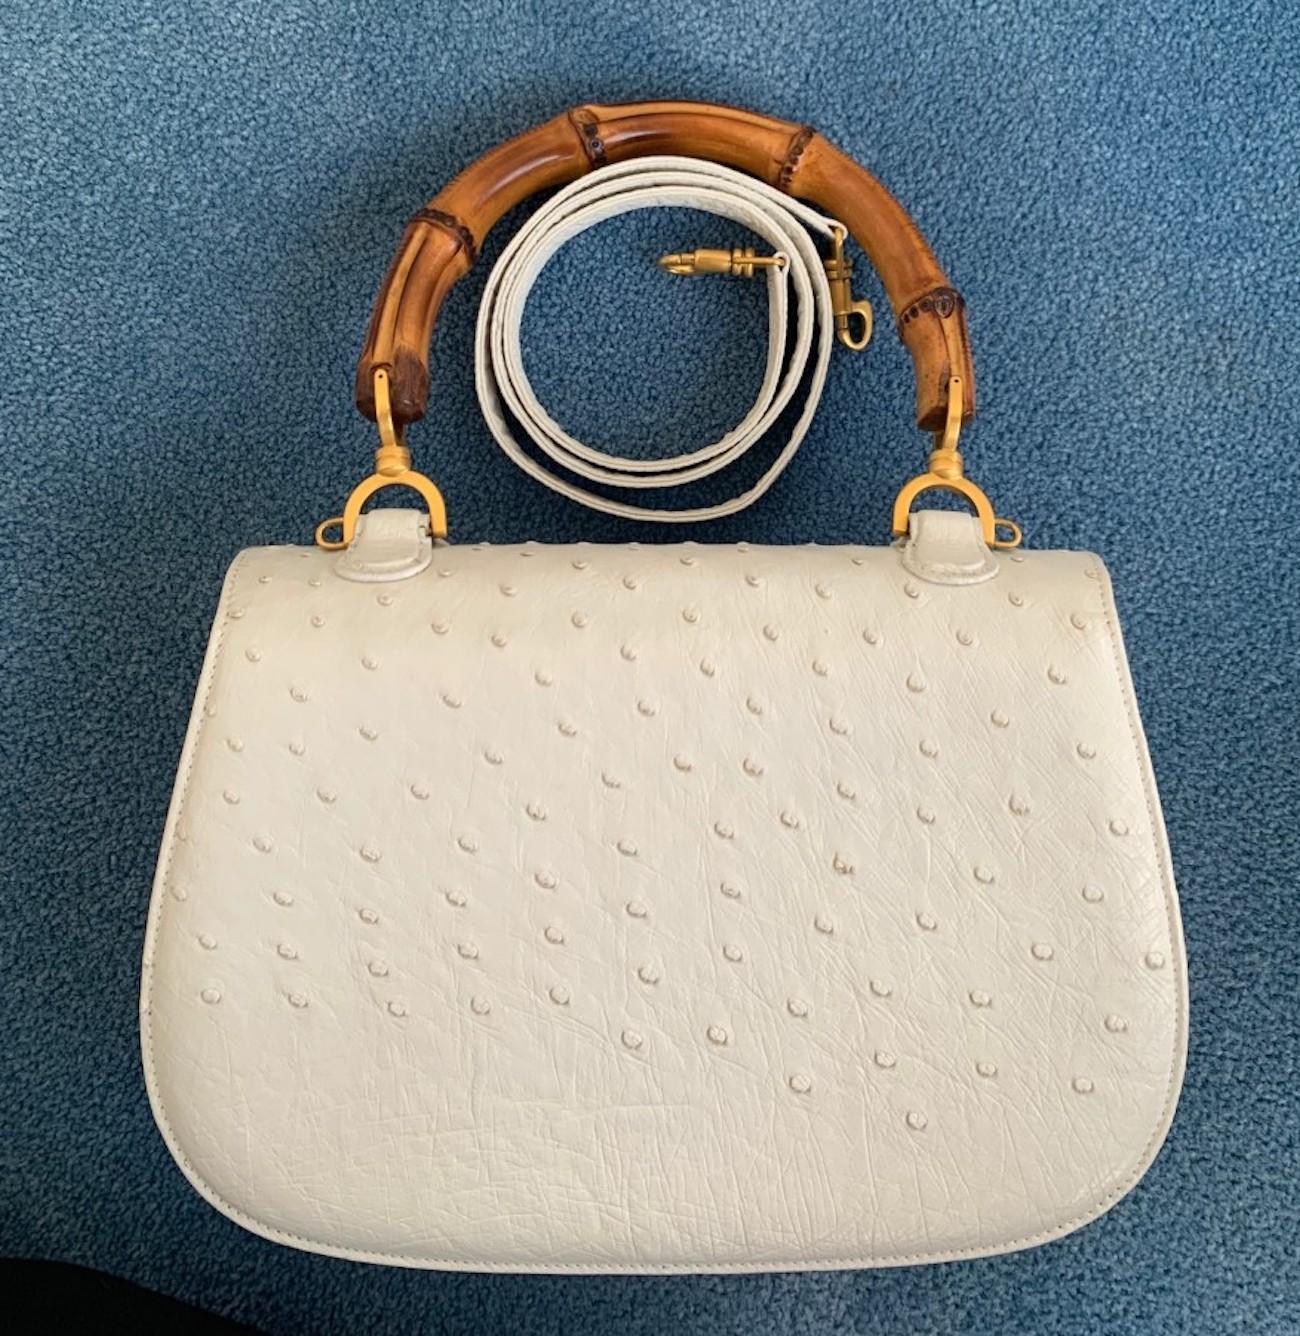 Presented here is the classic Gucci top handle bamboo hand bag in white ostrich leather. It has a structured brown bamboo top handle and detachable shoulder strap . The bag also features a fold over top,  a matching bamboo twist-lock closure, an